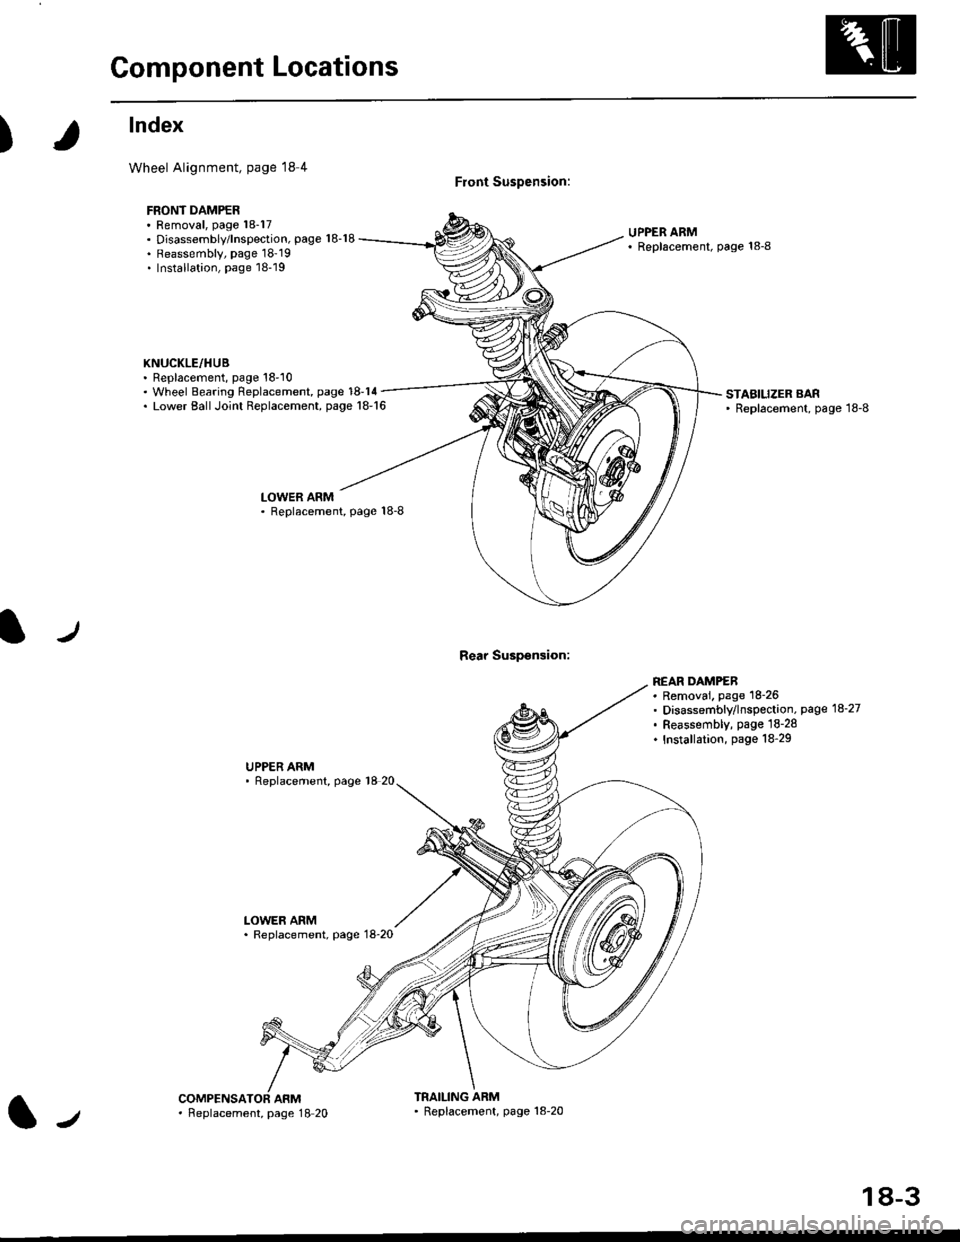 HONDA CIVIC 1999 6.G Workshop Manual Component Locations
)
lndex
Wheel Alignment, page l8 4
FBONT DAMPER. Removal, page 18-17. Disassembly/lnspection, page 18-18. Reassembly, page 1819. Installation, page 18-19
KNUCKLE/HUB. Replacement,